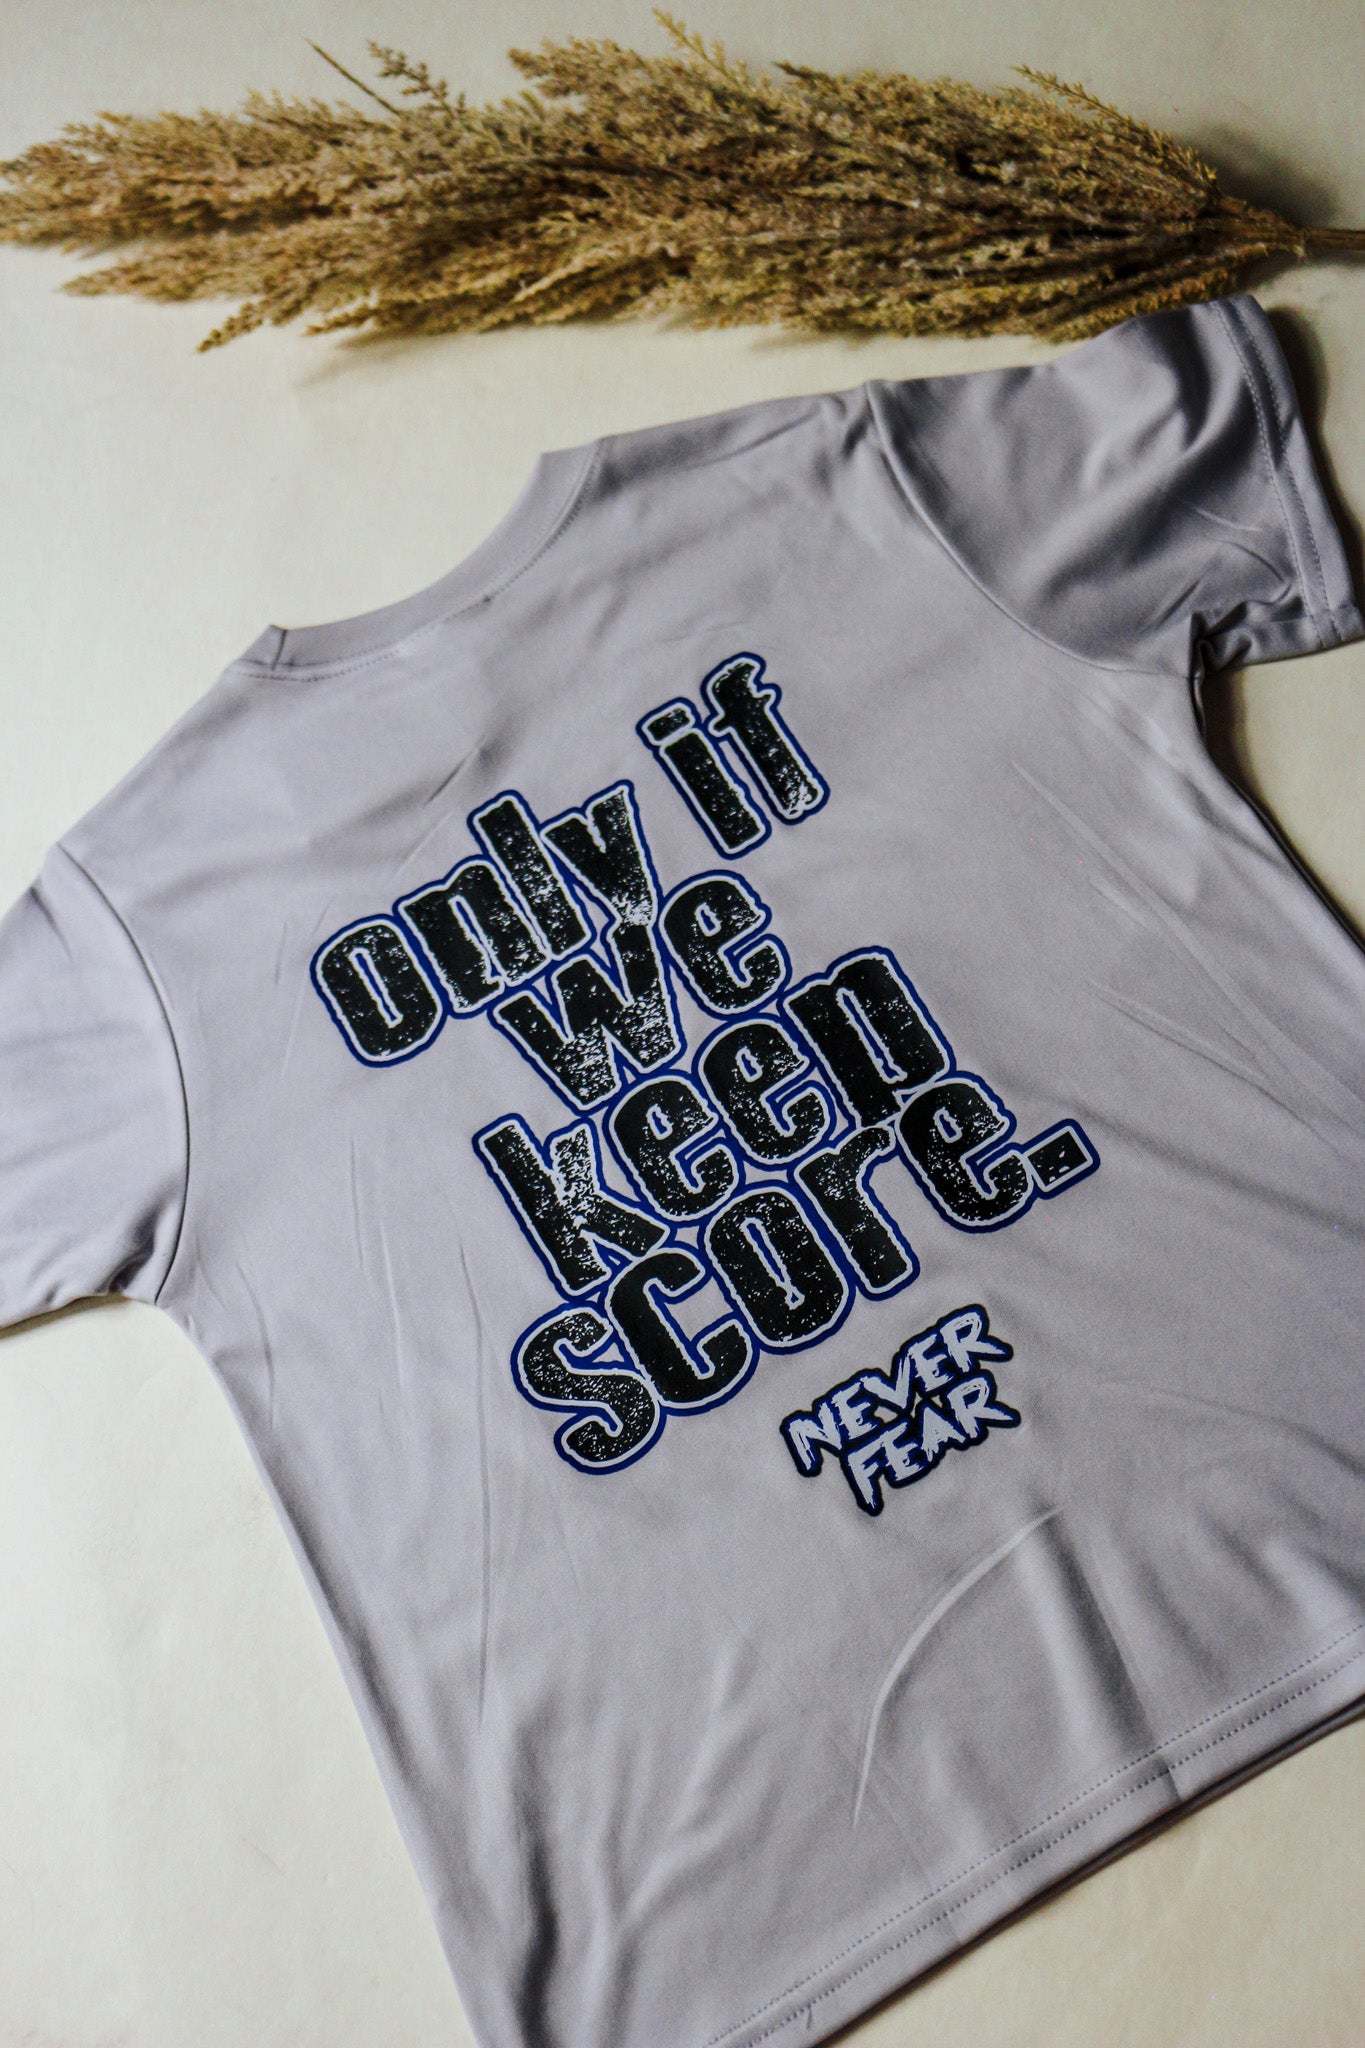 Only If We Keep Score Grey Youth Boys Tee